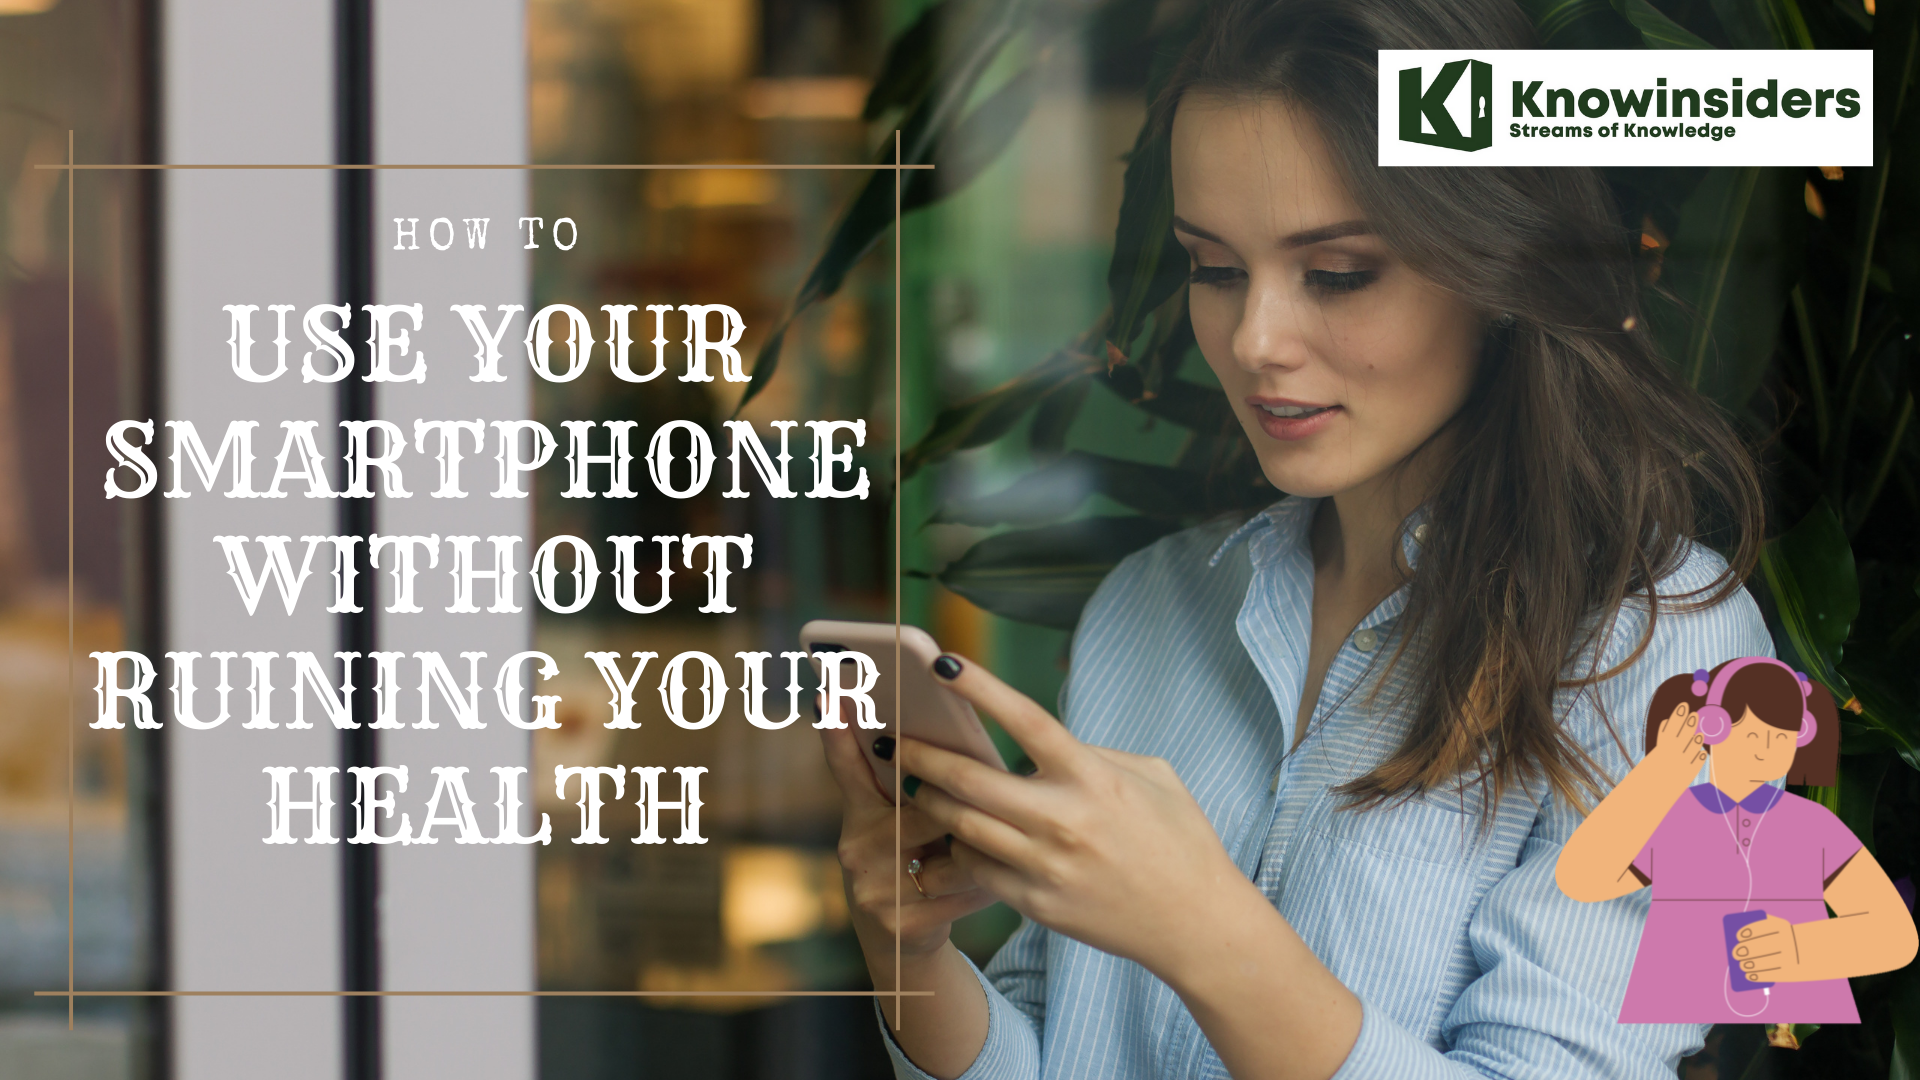 How To Use Your Smartphone Without Ruining Your Health: 8 Simple Tips